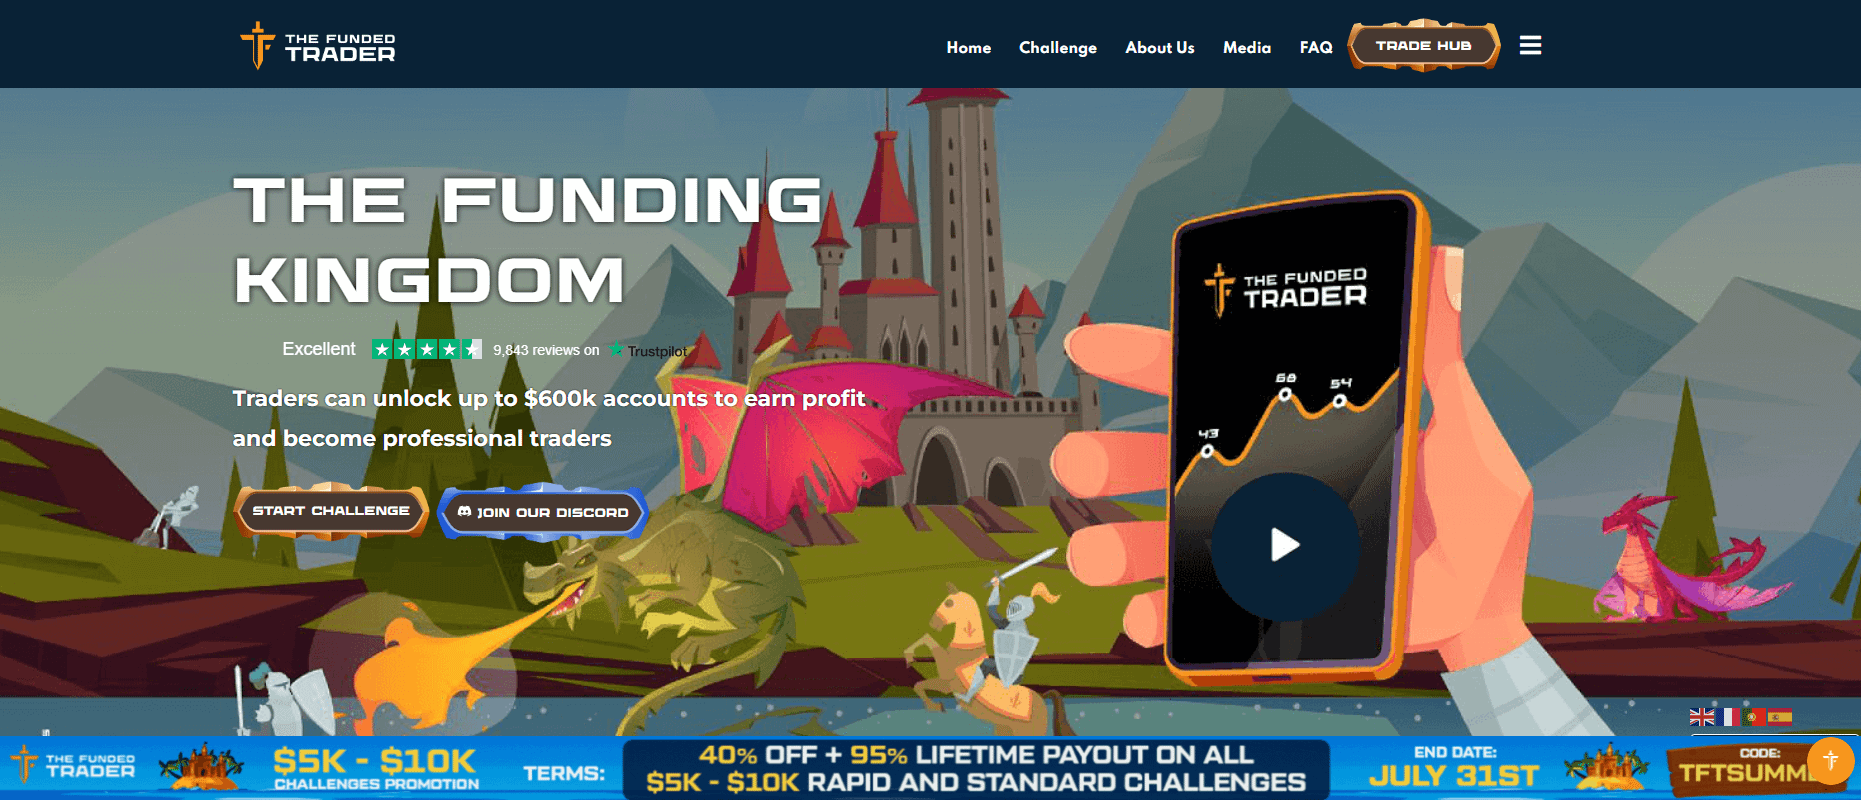 The Funded Traded homepage